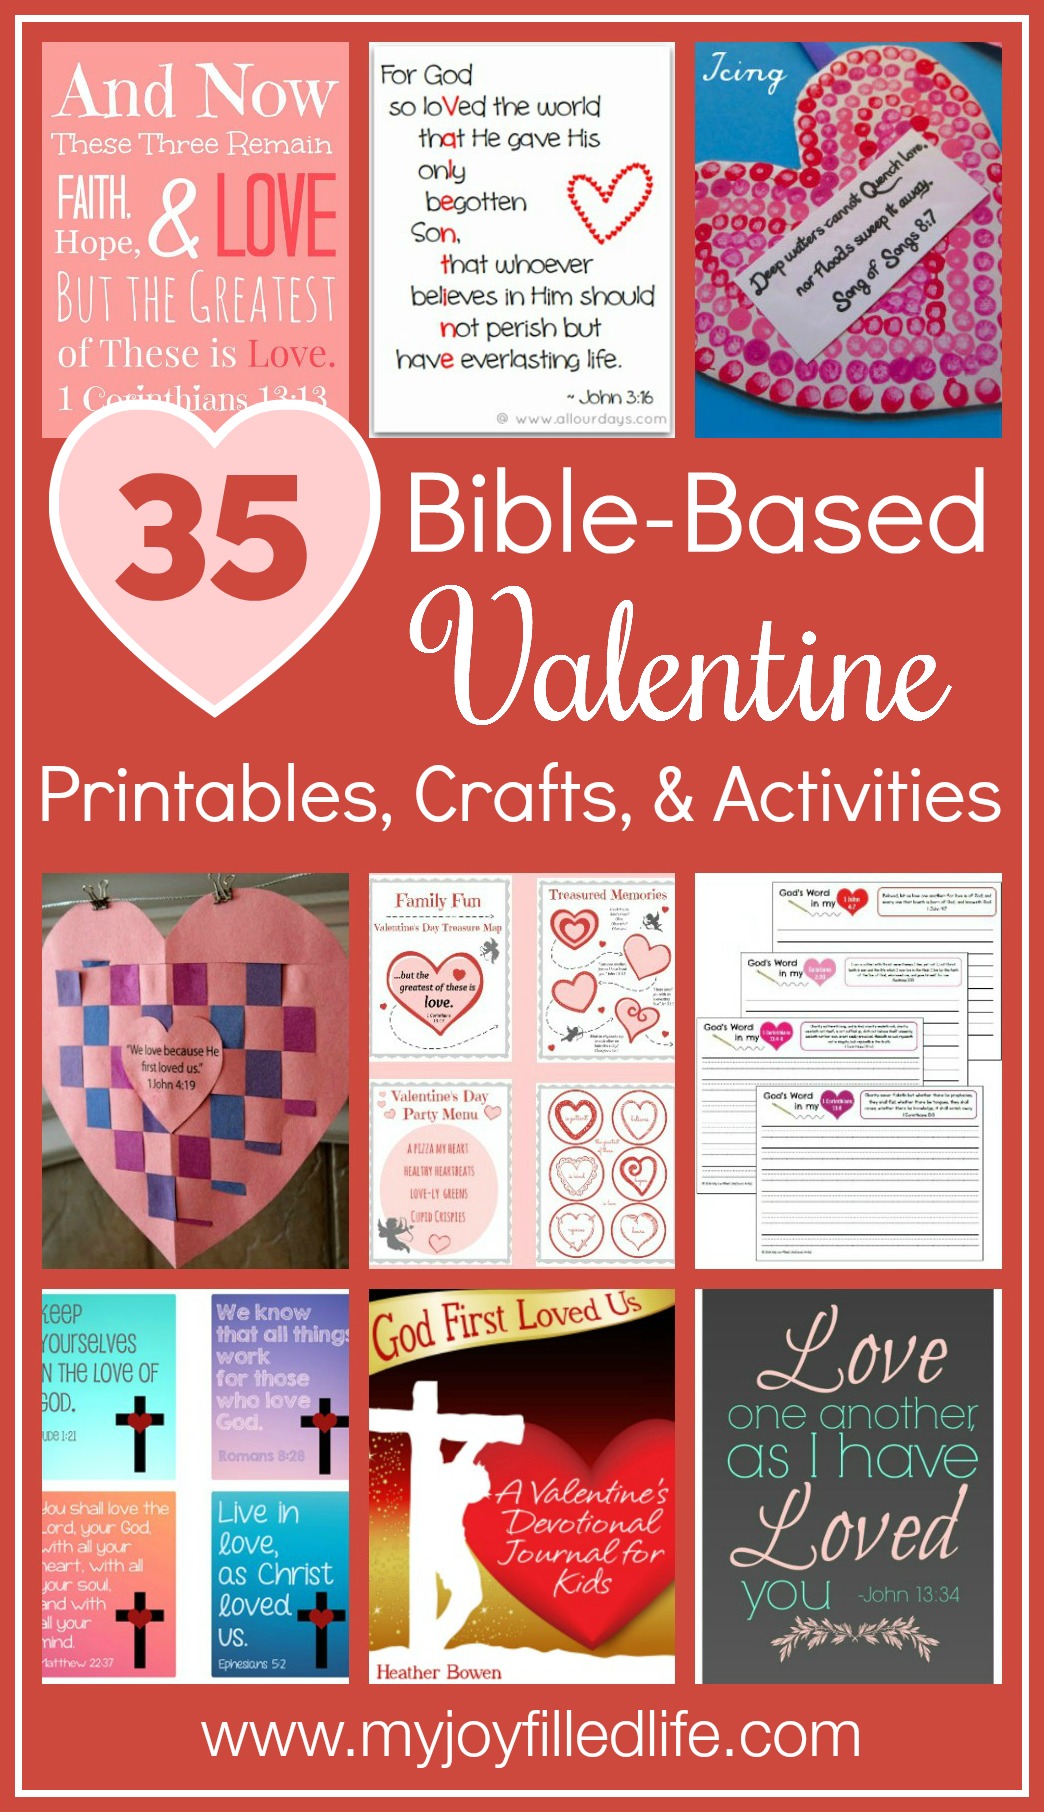 35-bible-based-valentine-printables-crafts-activities-my-joy-filled-life